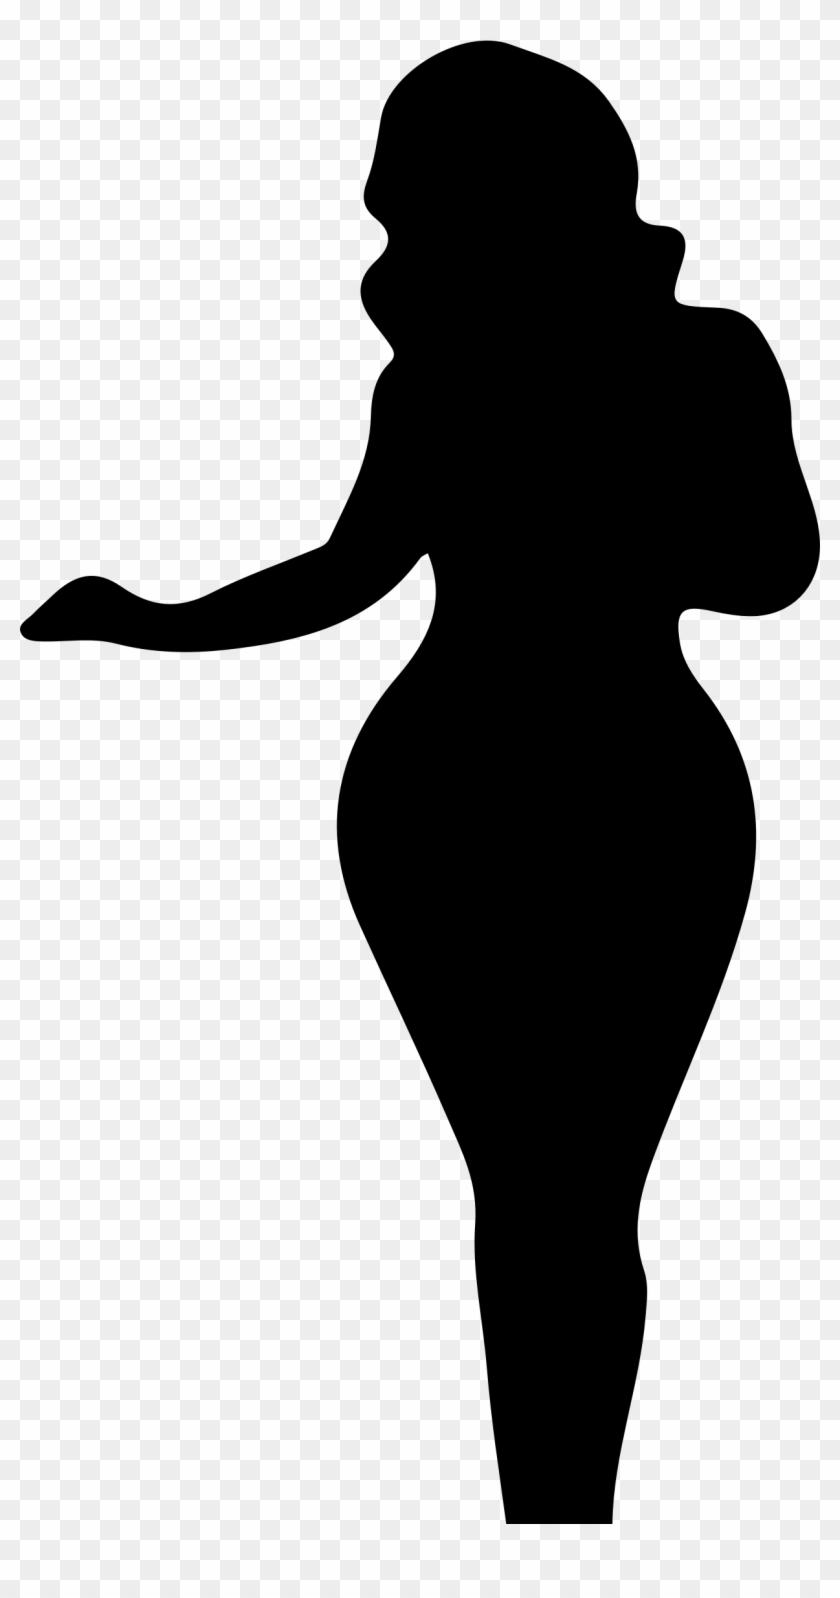 Clipart - Silhouette Of A Woman - Free Transparent PNG Clipart Images  Download